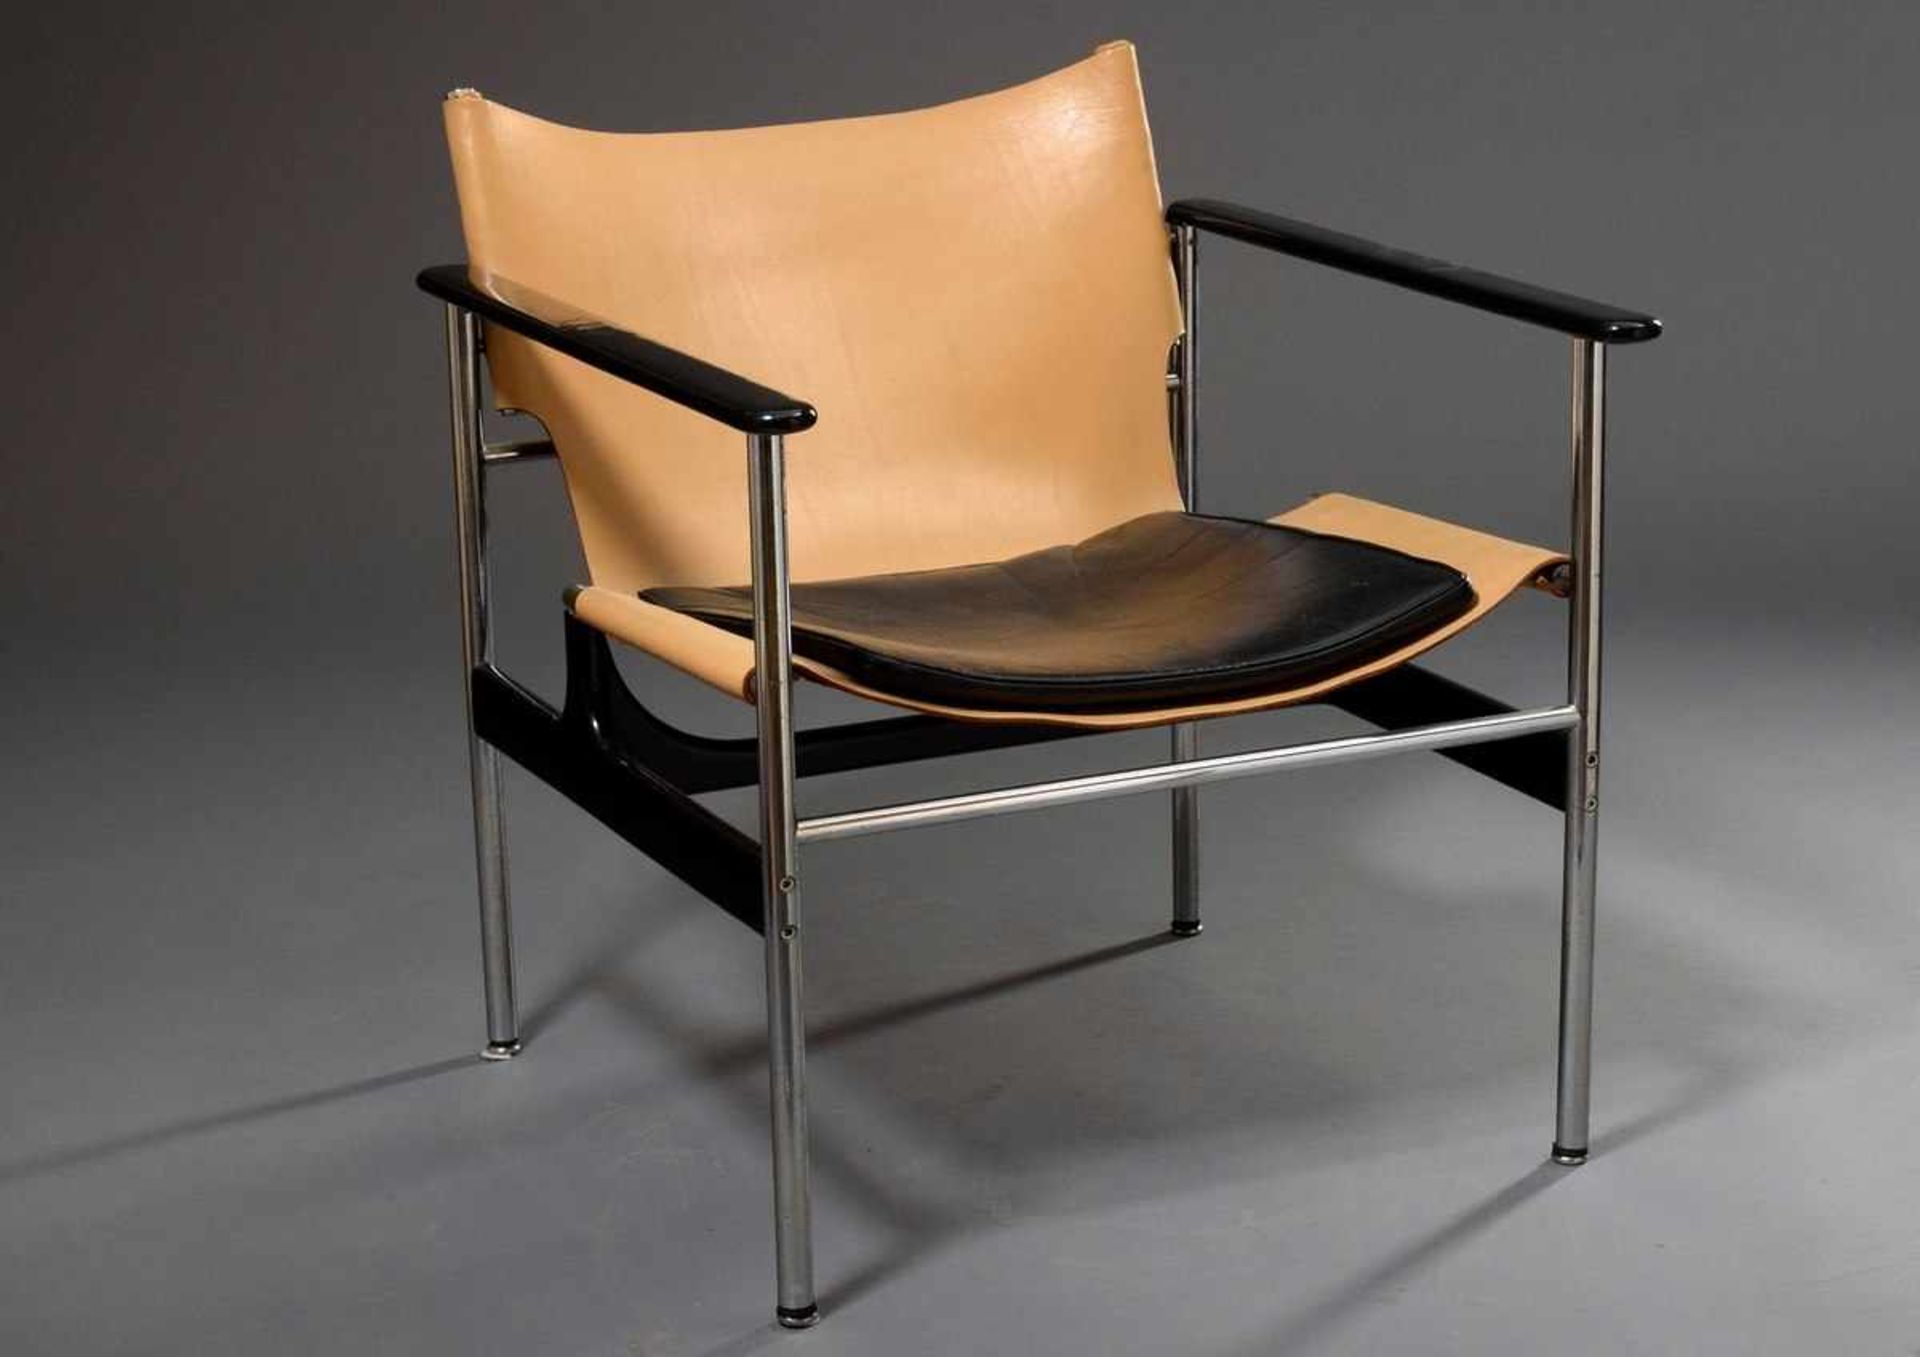 "Sling" Lounge Chair No. 657, designed by Charles Pollock (1930-2013) 1960, tubular steel, leather - Image 2 of 4